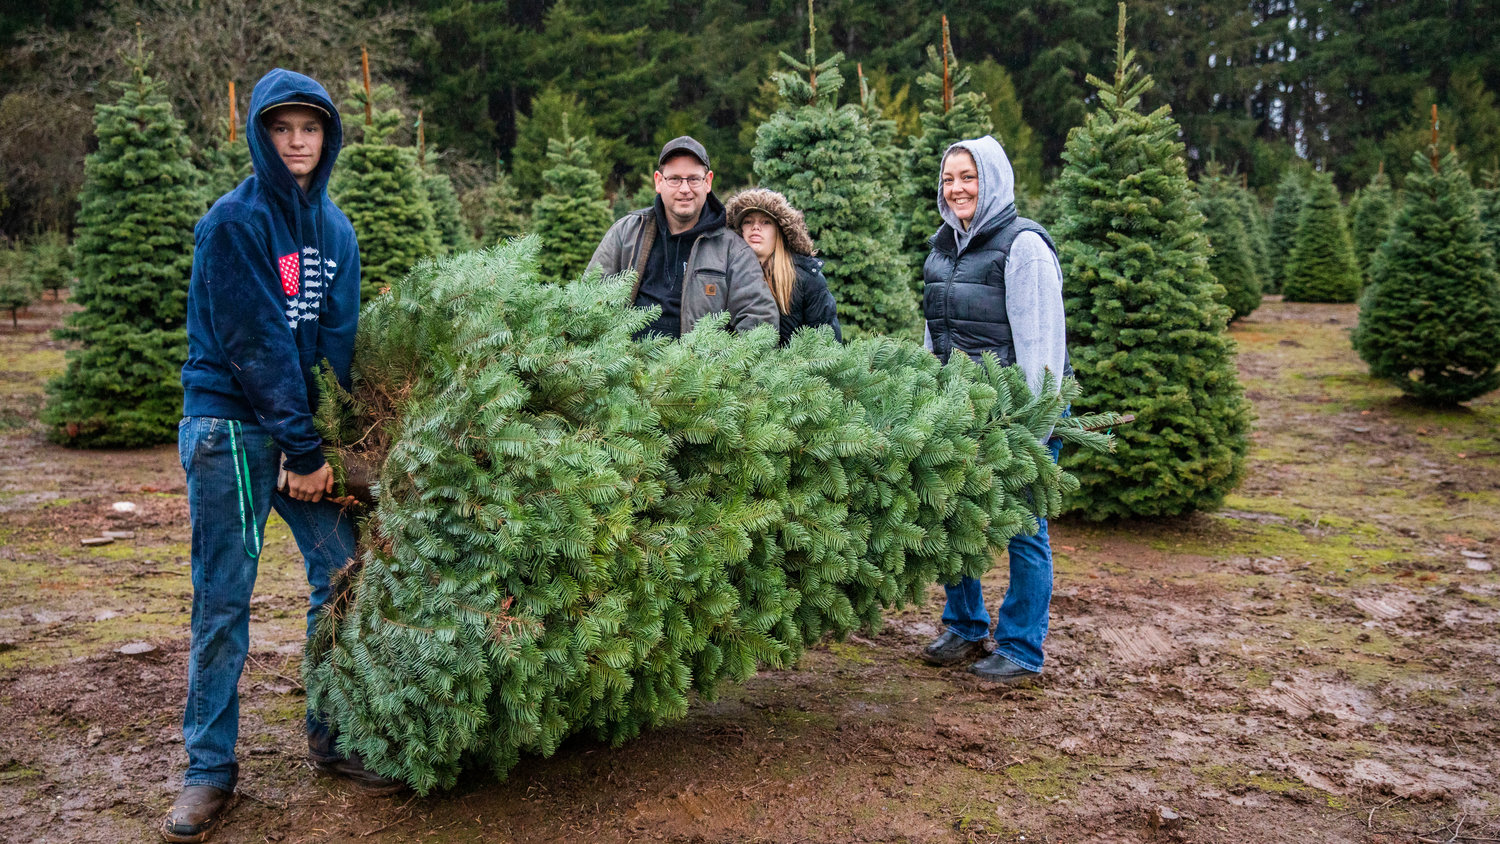 The Haag family of Chehalis poses for a photo after chopping down a tree at the Mistletoe Tree Farm on Friday.